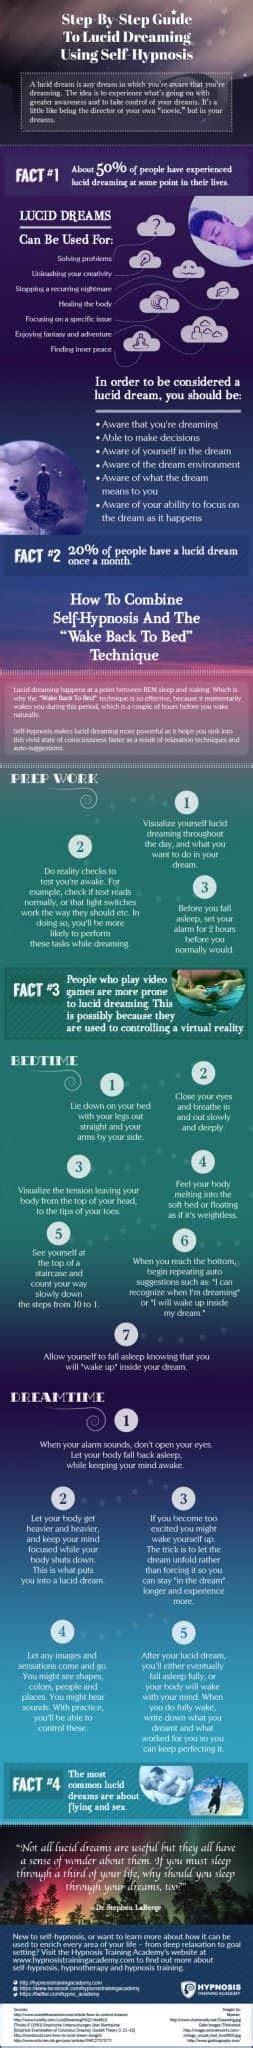 Infographic Guide To Lucid Dreaming Using Hypnosis